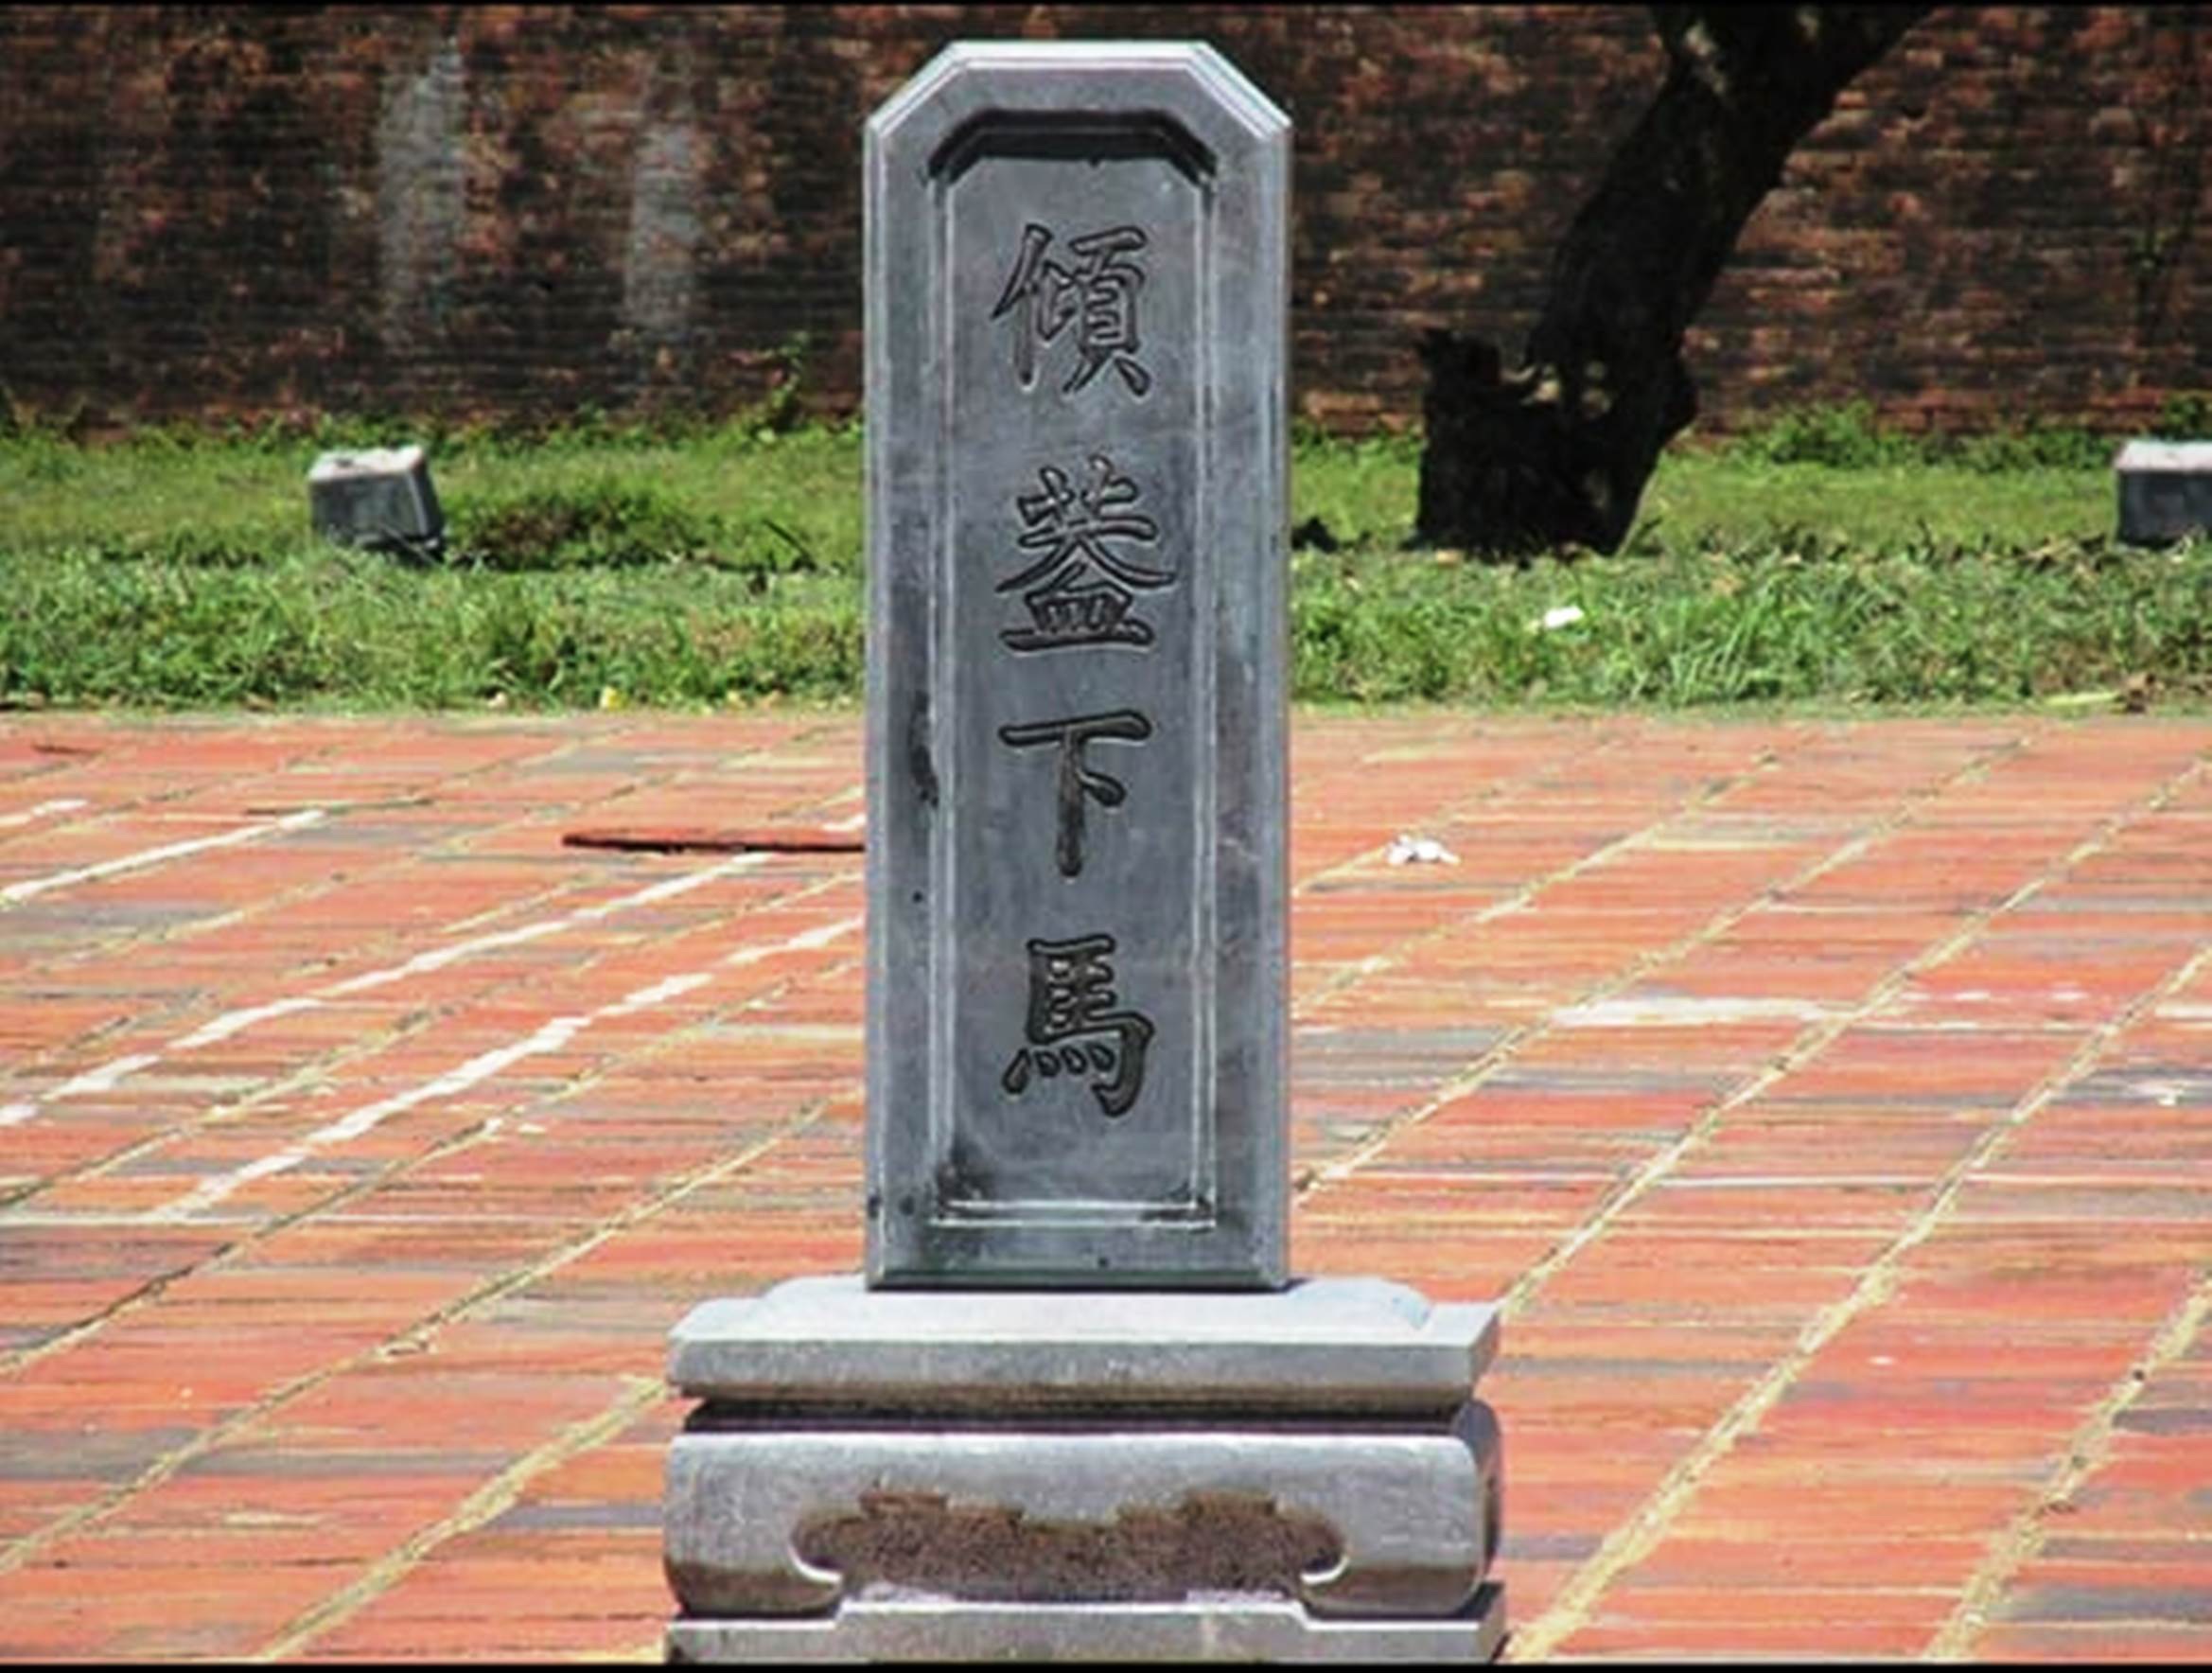 Suddenly, the stele at Phu Van Lau relic was broken - 2